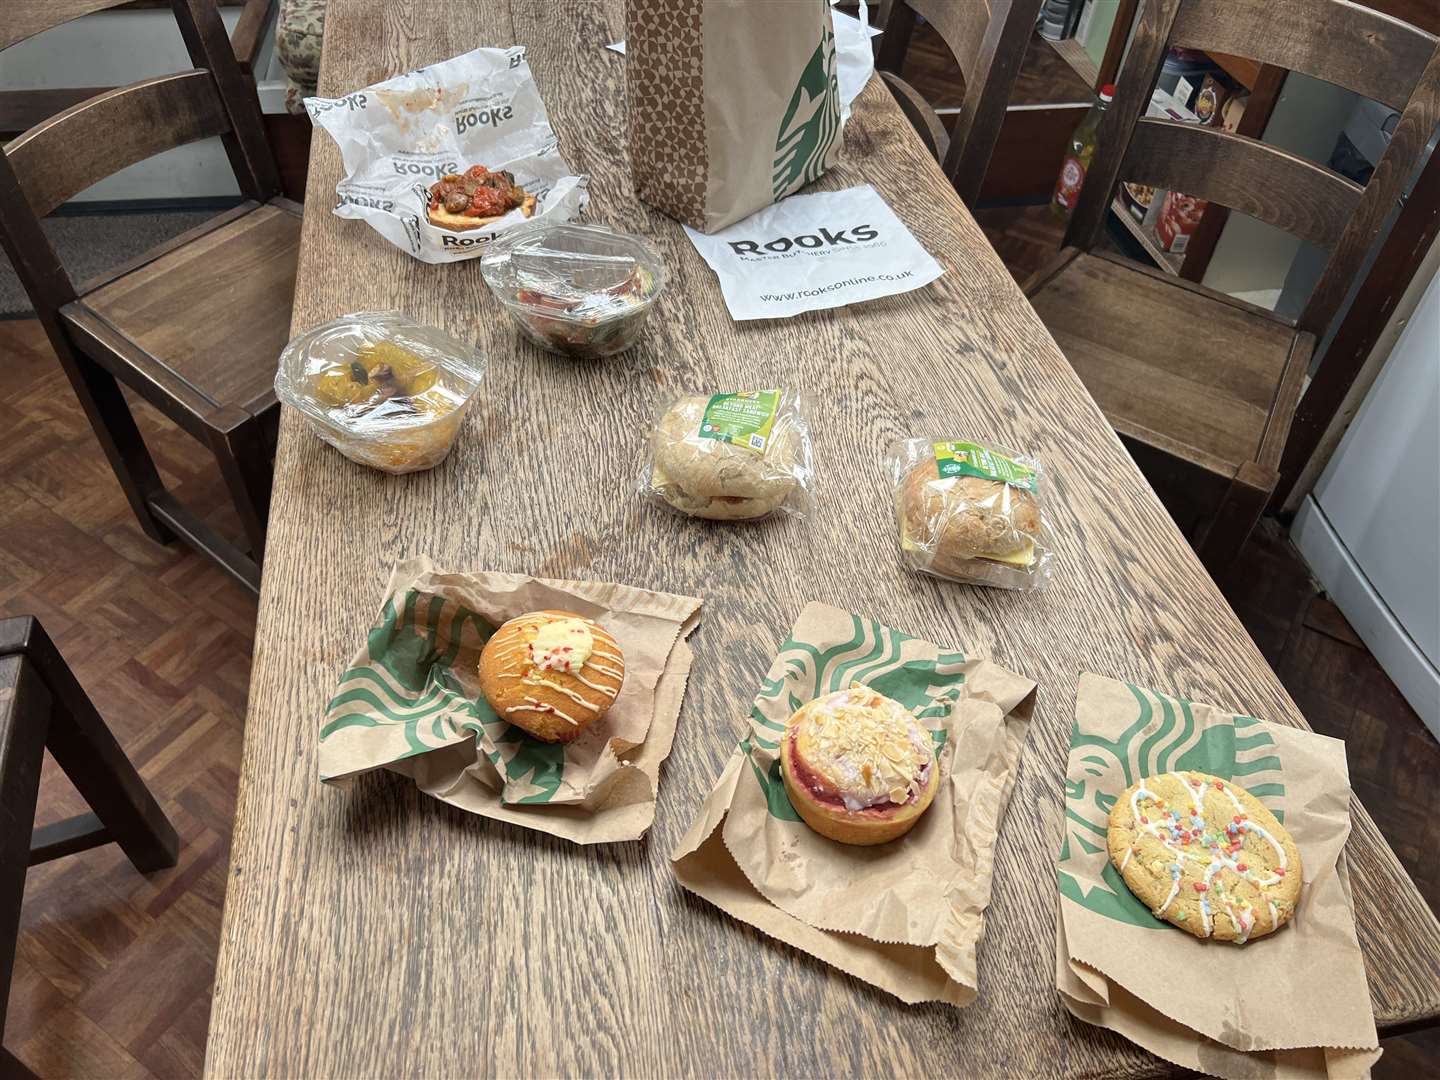 Megan's Too Good To Go goodies from Sheppey Starbucks and The Italian Store in Sittingbourne